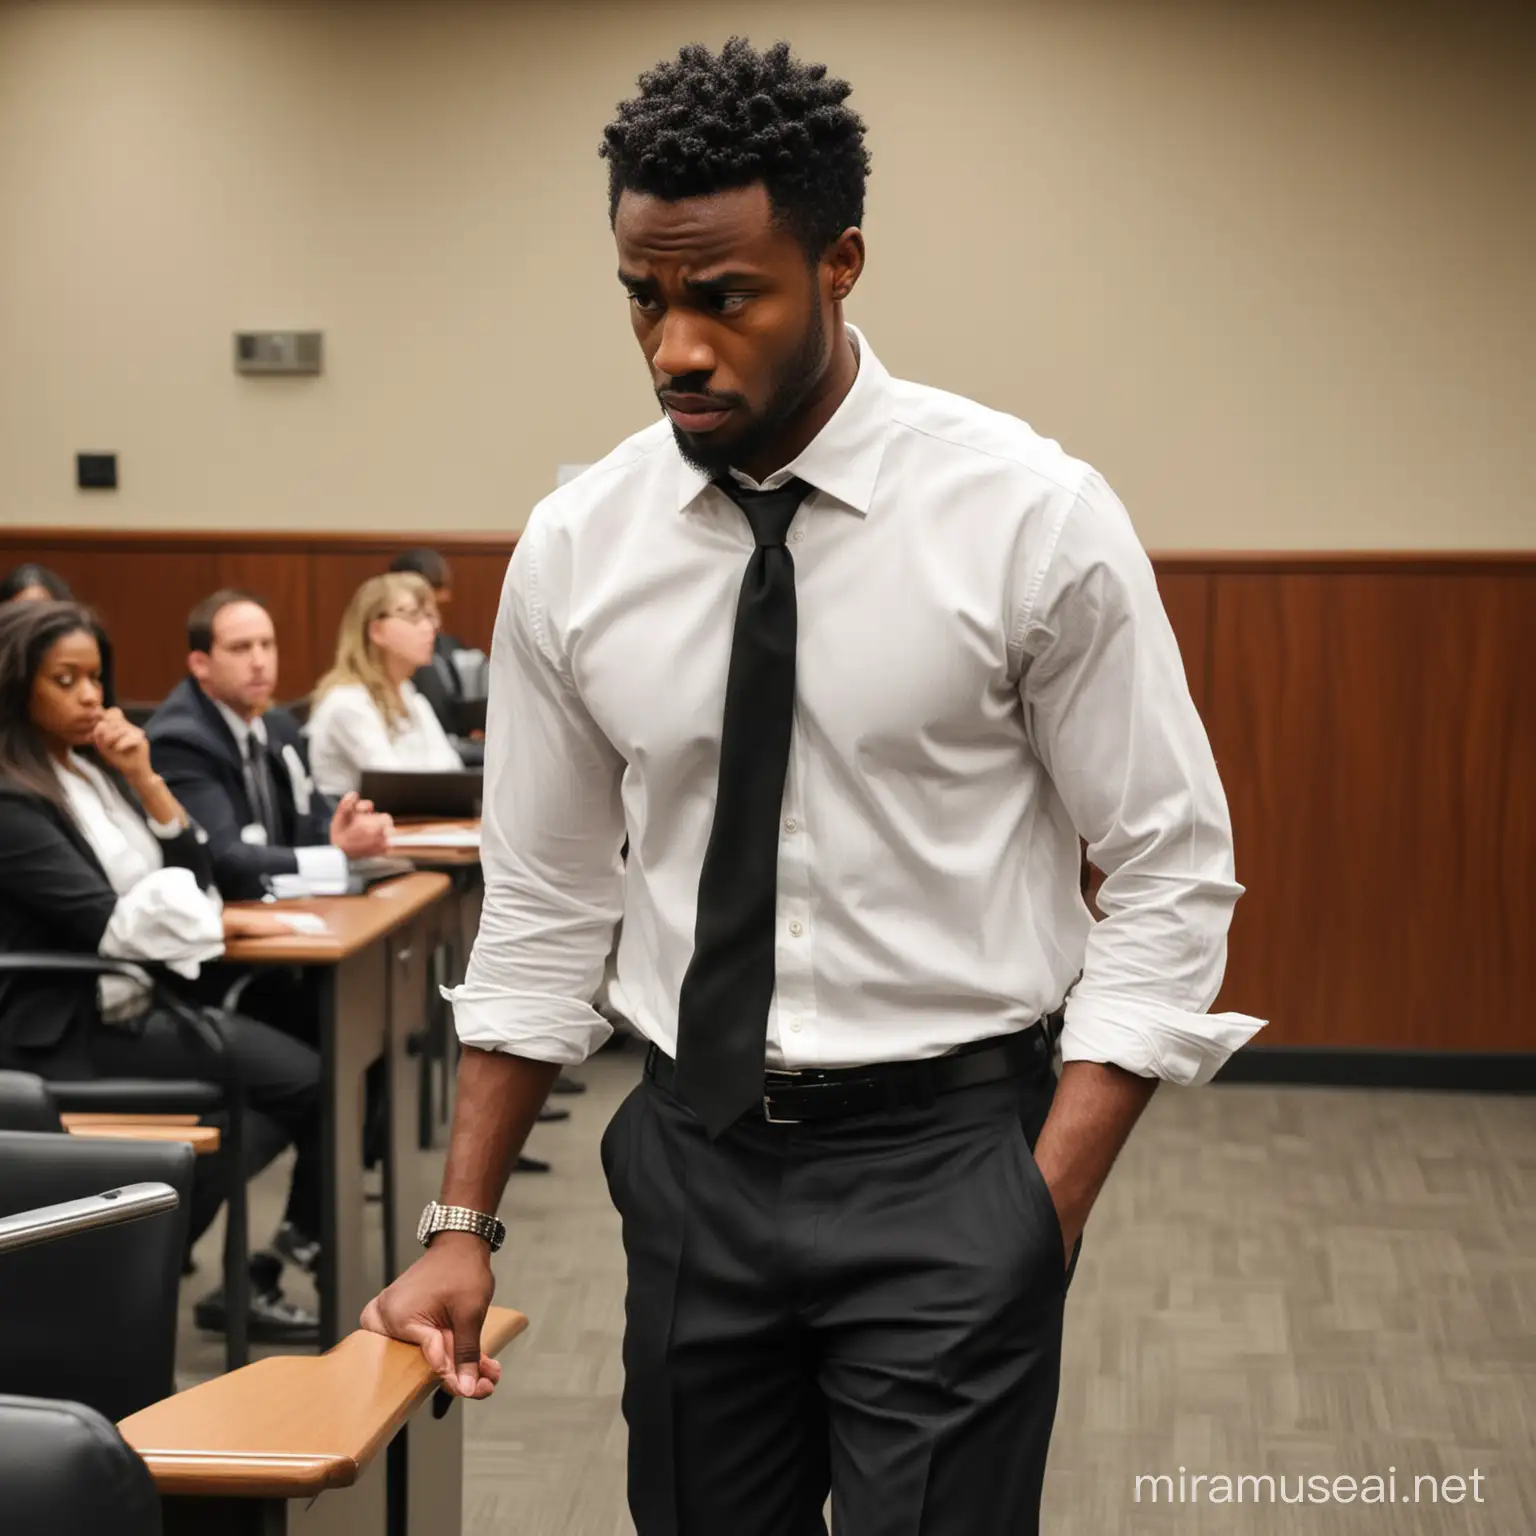 Black man with white button down with the sleeves rolled up with a disheveled tie and black pants.  He is angrily walking in a jury room. He is 5 foot 6 inches.